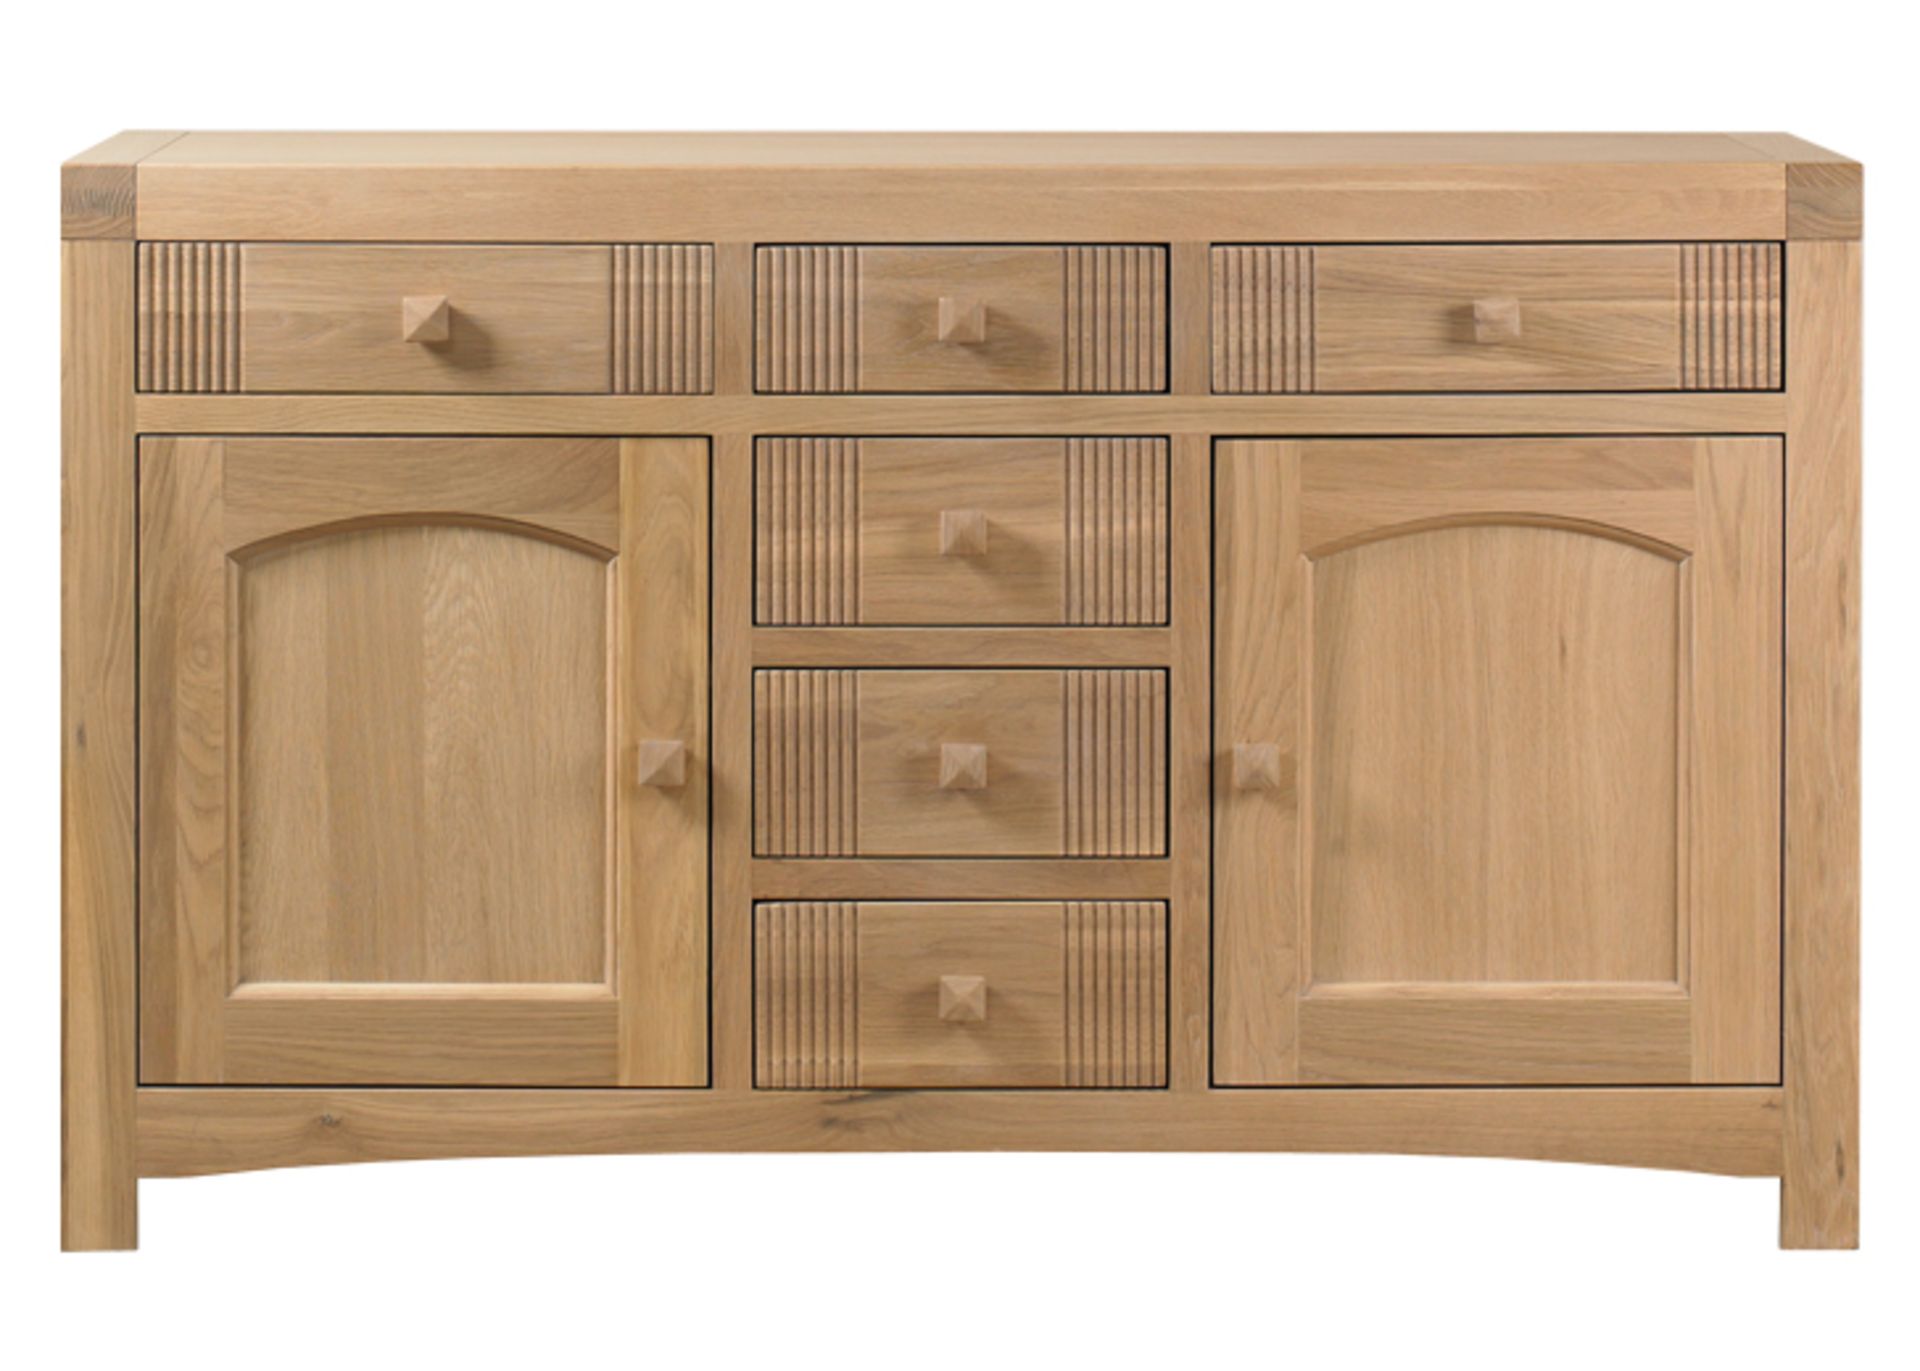 1 x Mark Webster Buckingham Large Sideboad  - Three Door/Three Drawer - White Wash Oak With a - Image 2 of 5